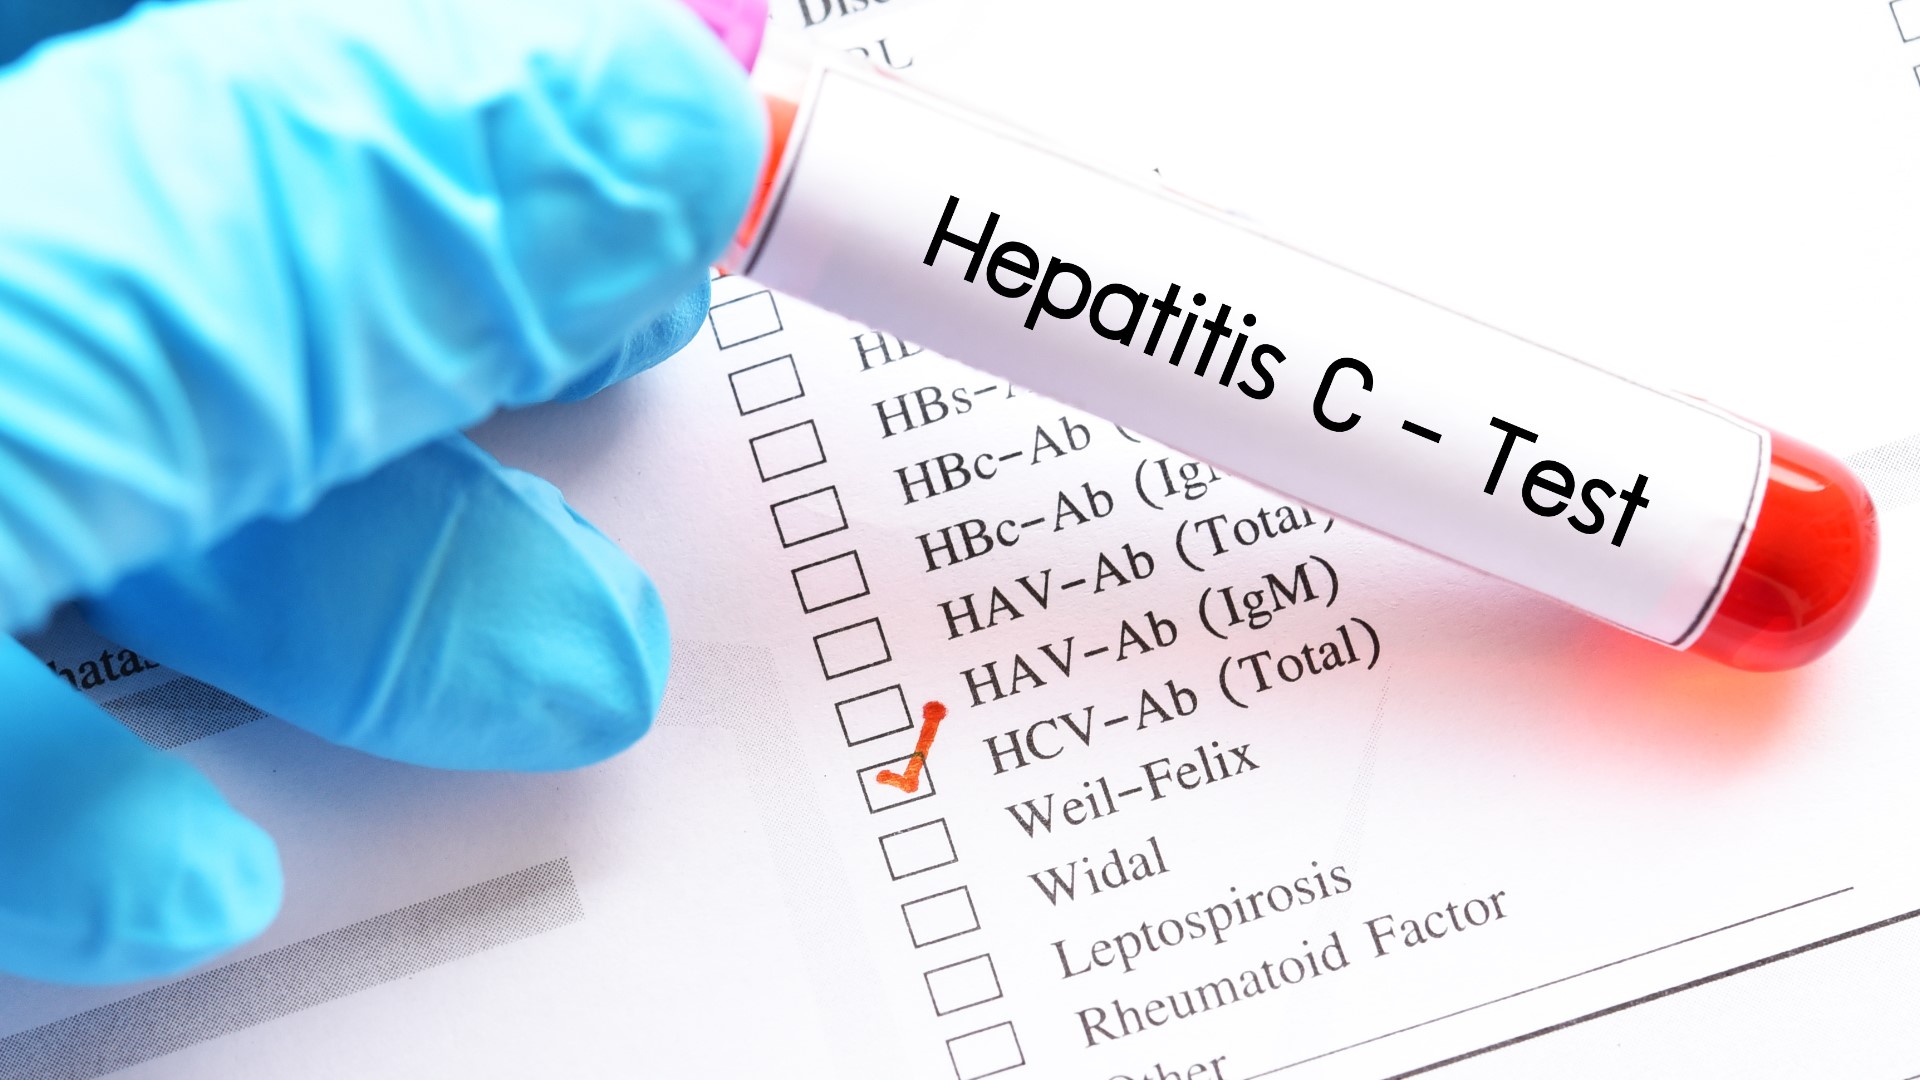 Hepatitis is a condition where the liver becomes inflamed. According to new data, the cases of hepatitis C nearly quadrupled in Maine between 2019 and 2020.